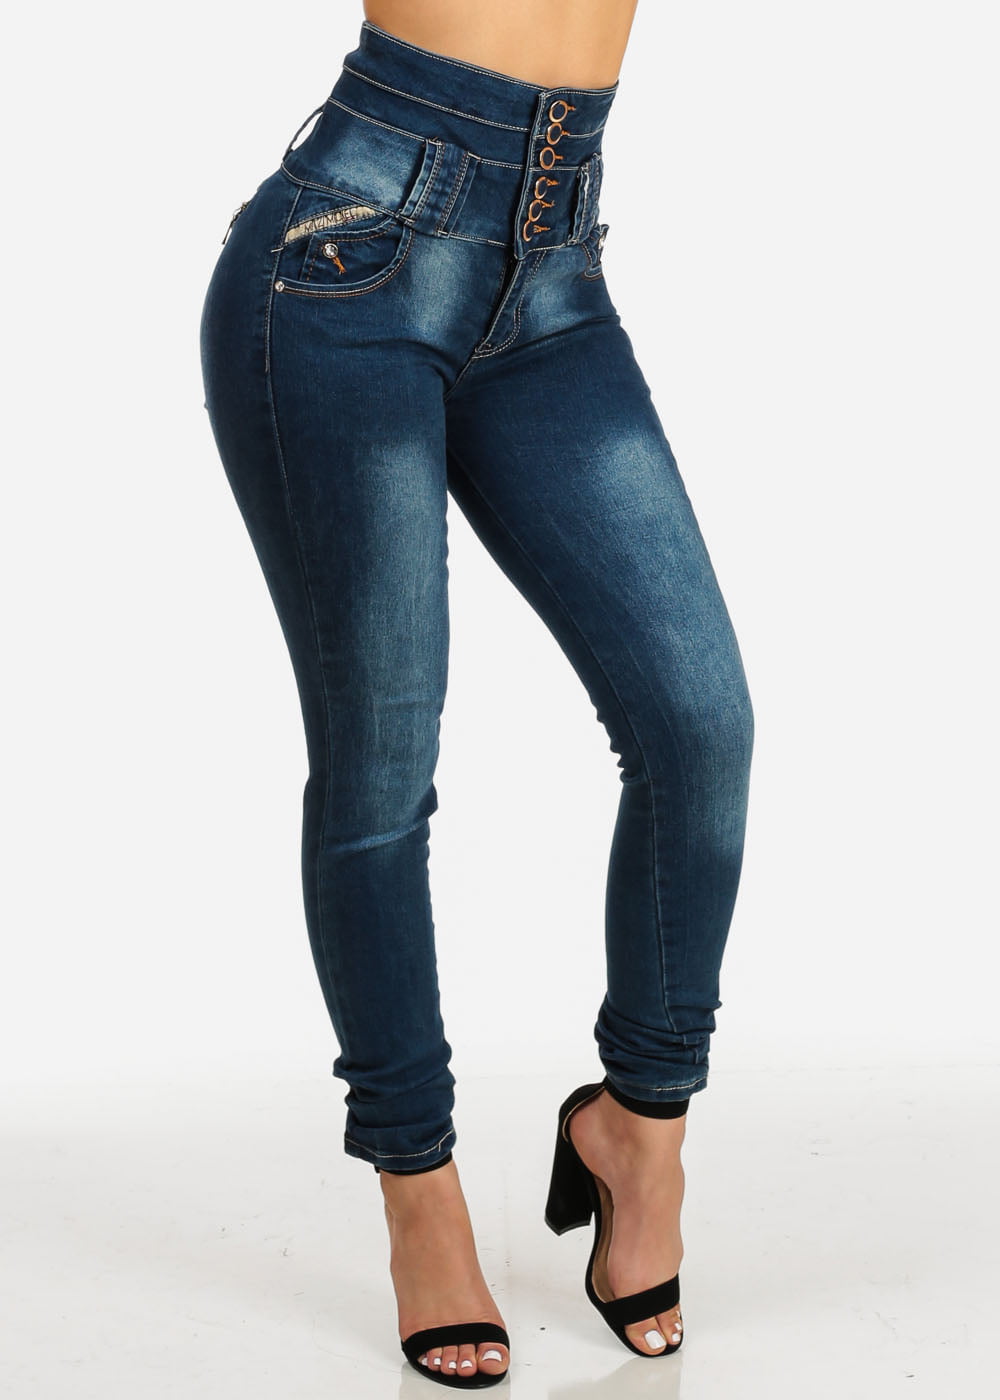 How womens super skinny jeans 8 1 - where where womans clothes stores ...